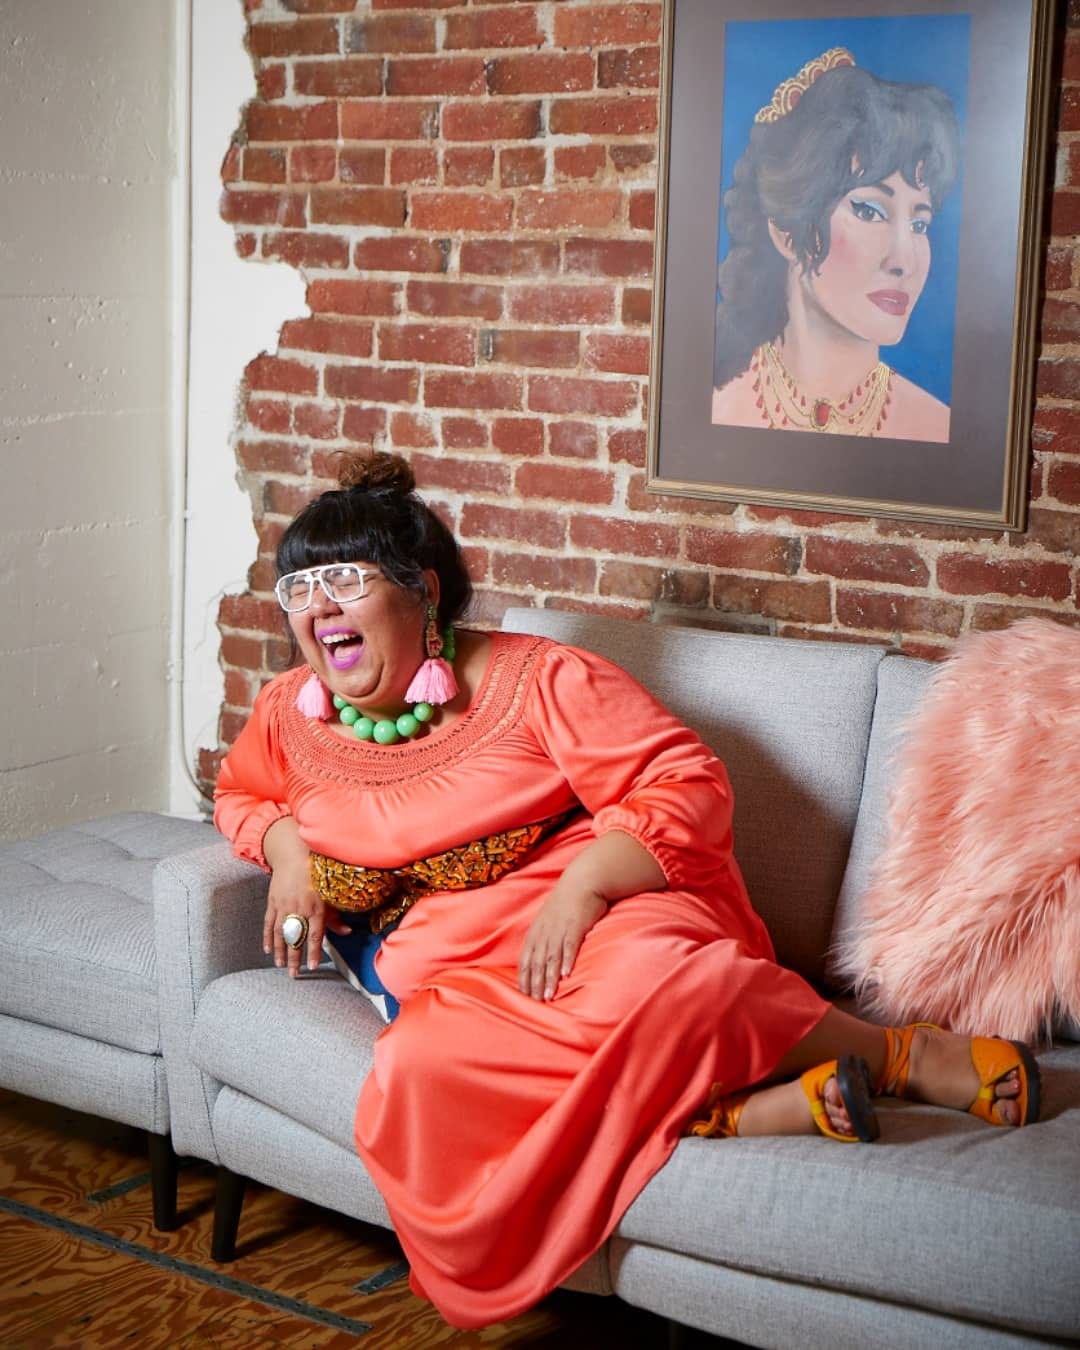 Today's guest Virgie Tovar, laughing while sat on a sofa against an exposed red brick wall